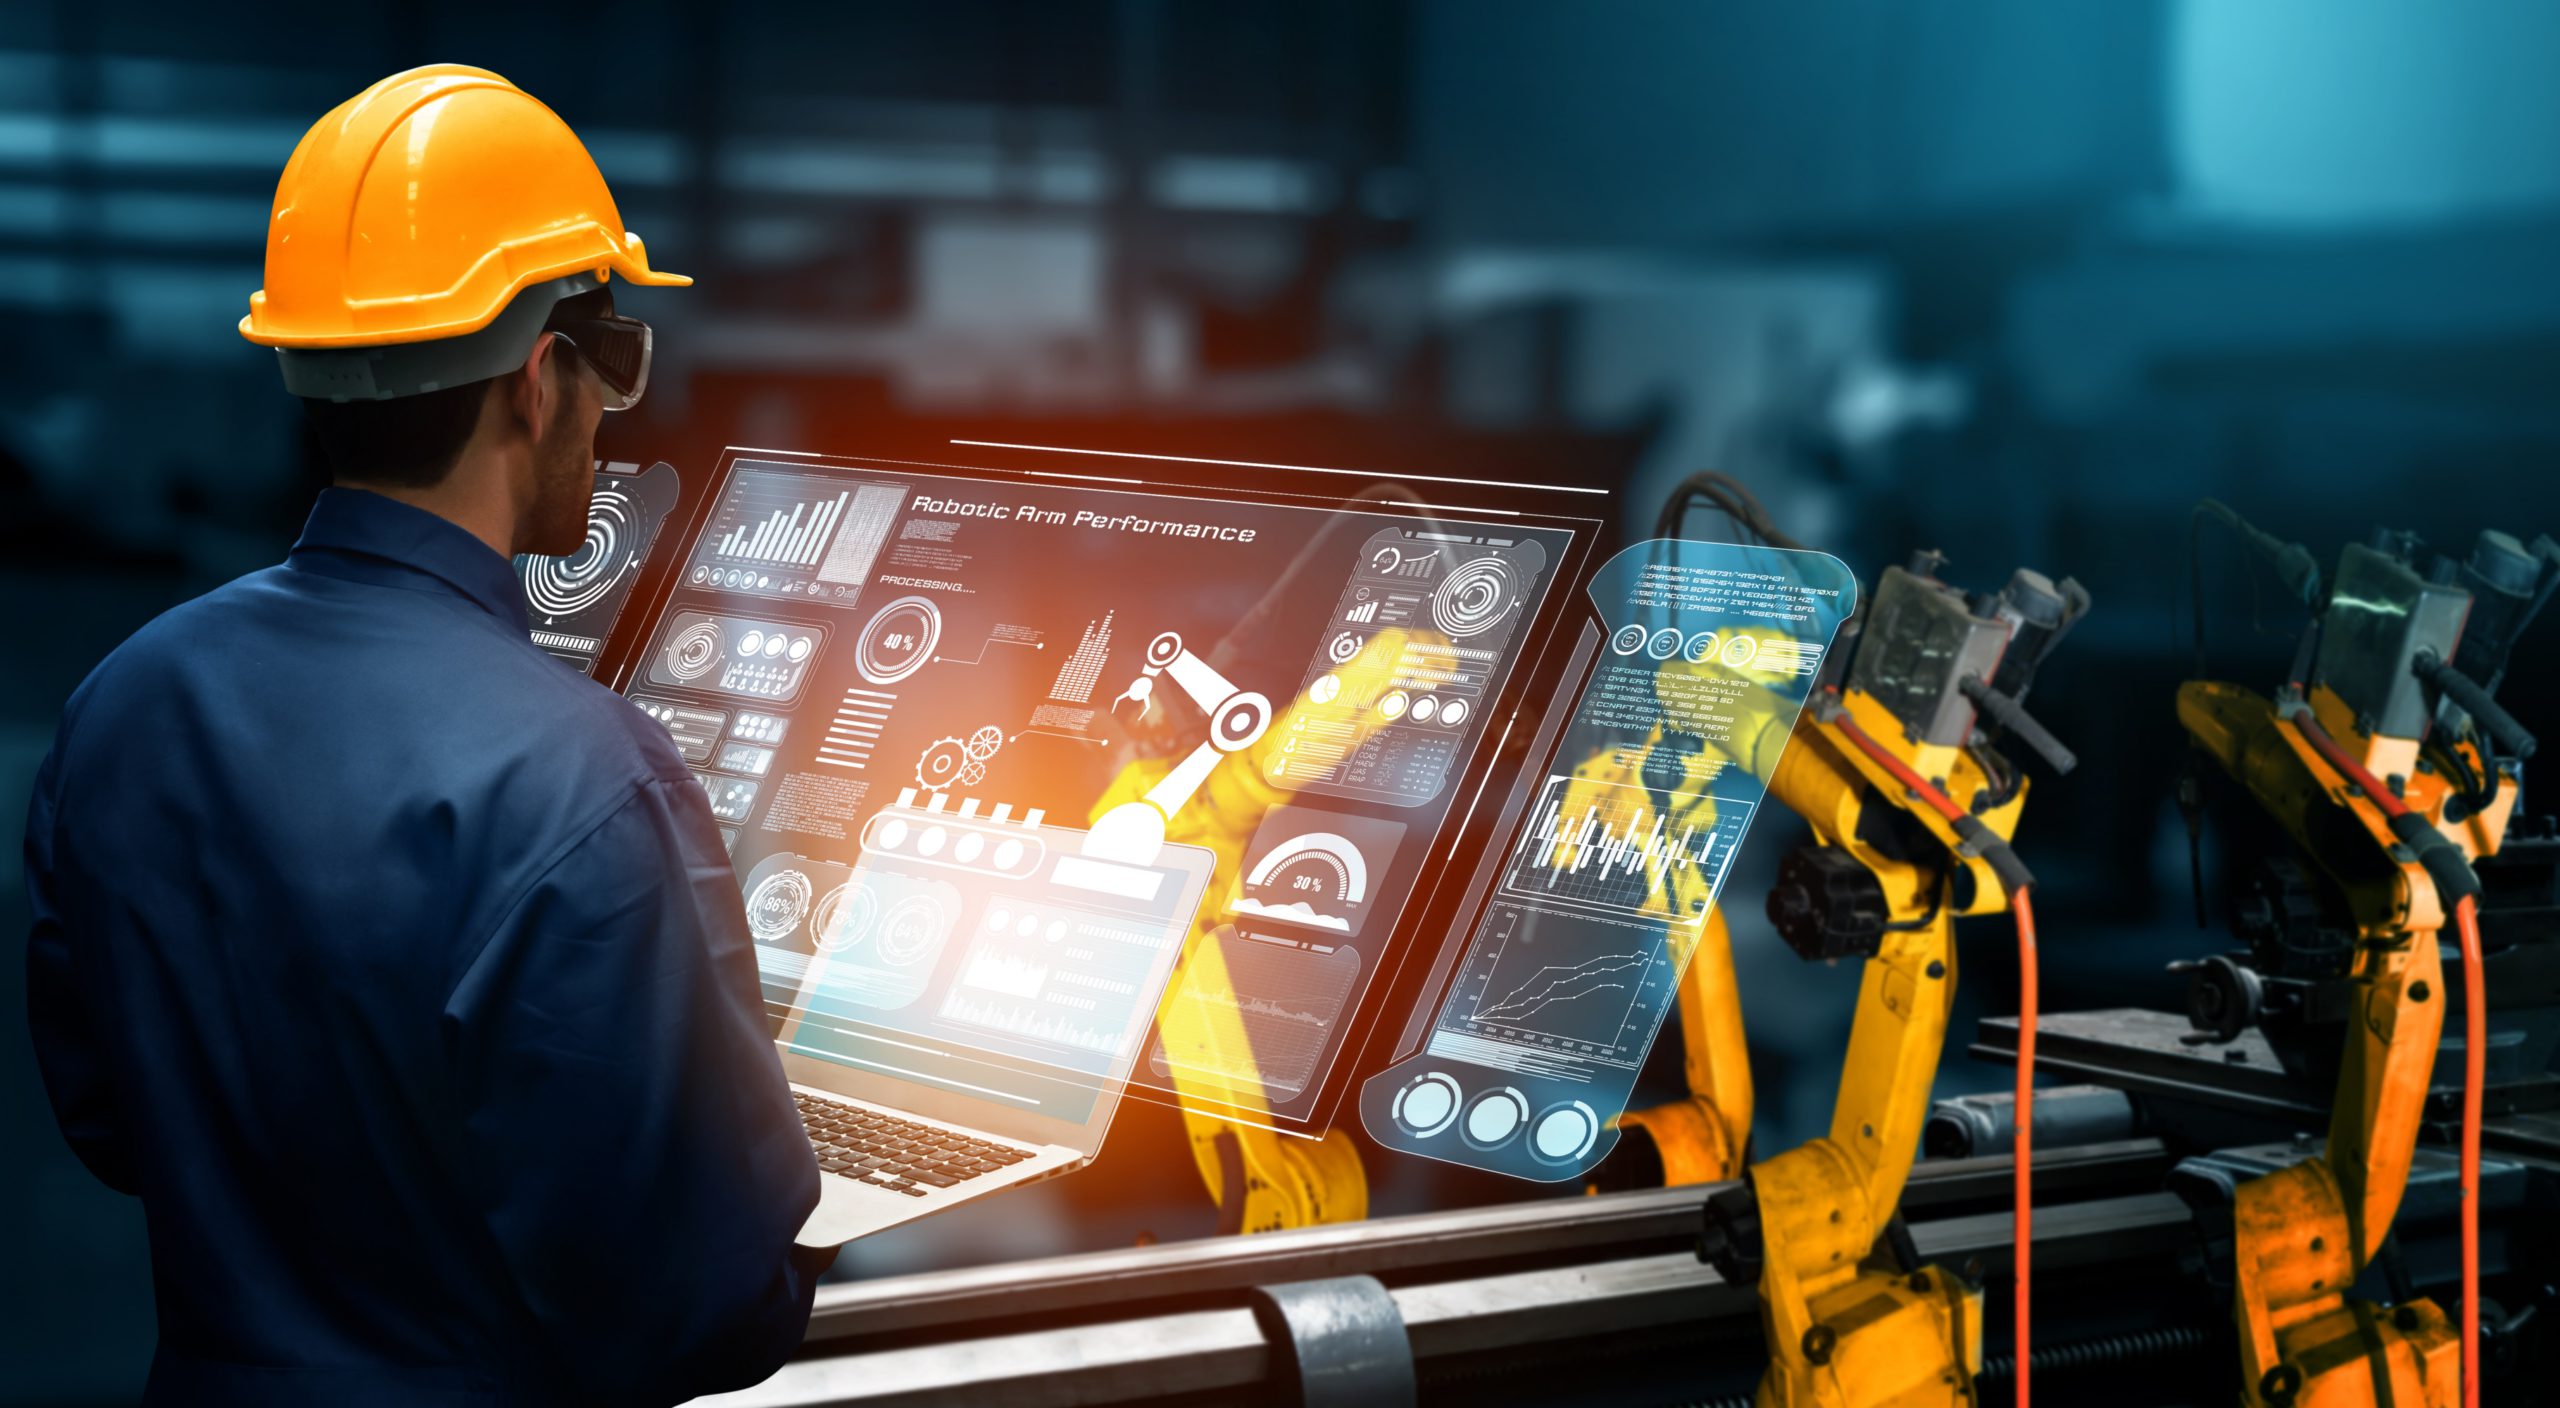 Role Of Big Data and Machine Learning In Manufacturing Industry